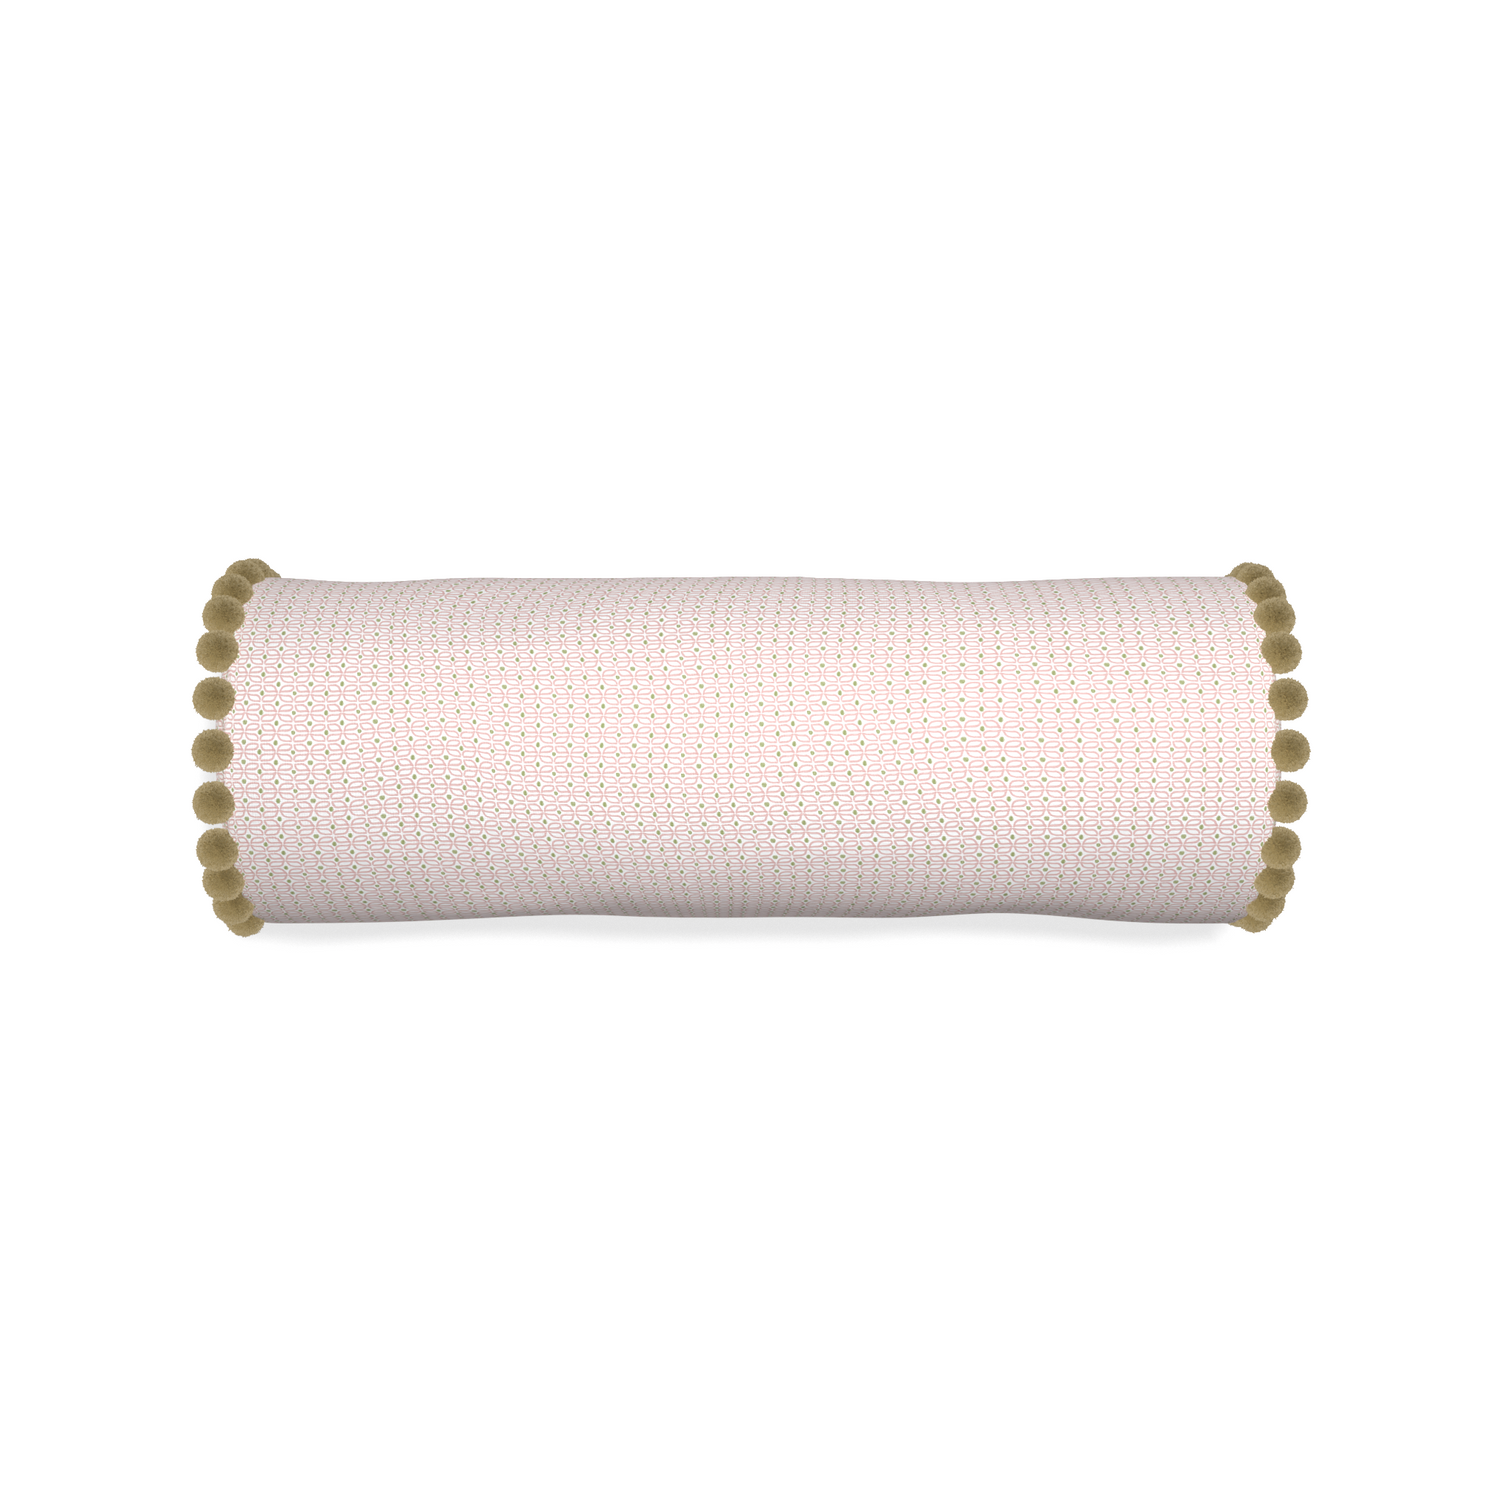 Bolster loomi pink custom pillow with olive pom pom on white background